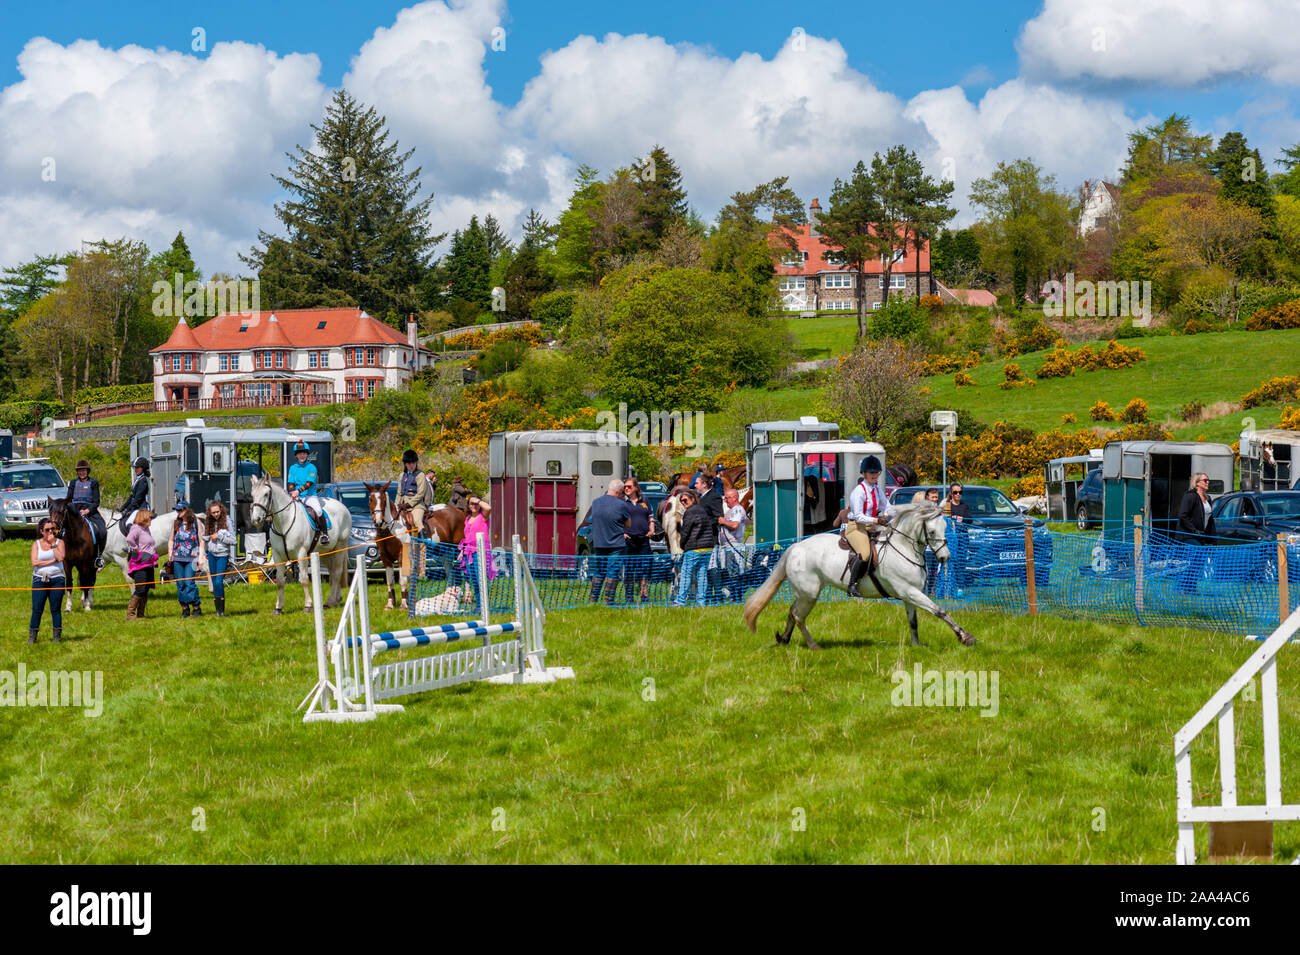 Show jumping arena at The Village Cattle show at the Knapps Kilmacolm Scotland. Stock Photo